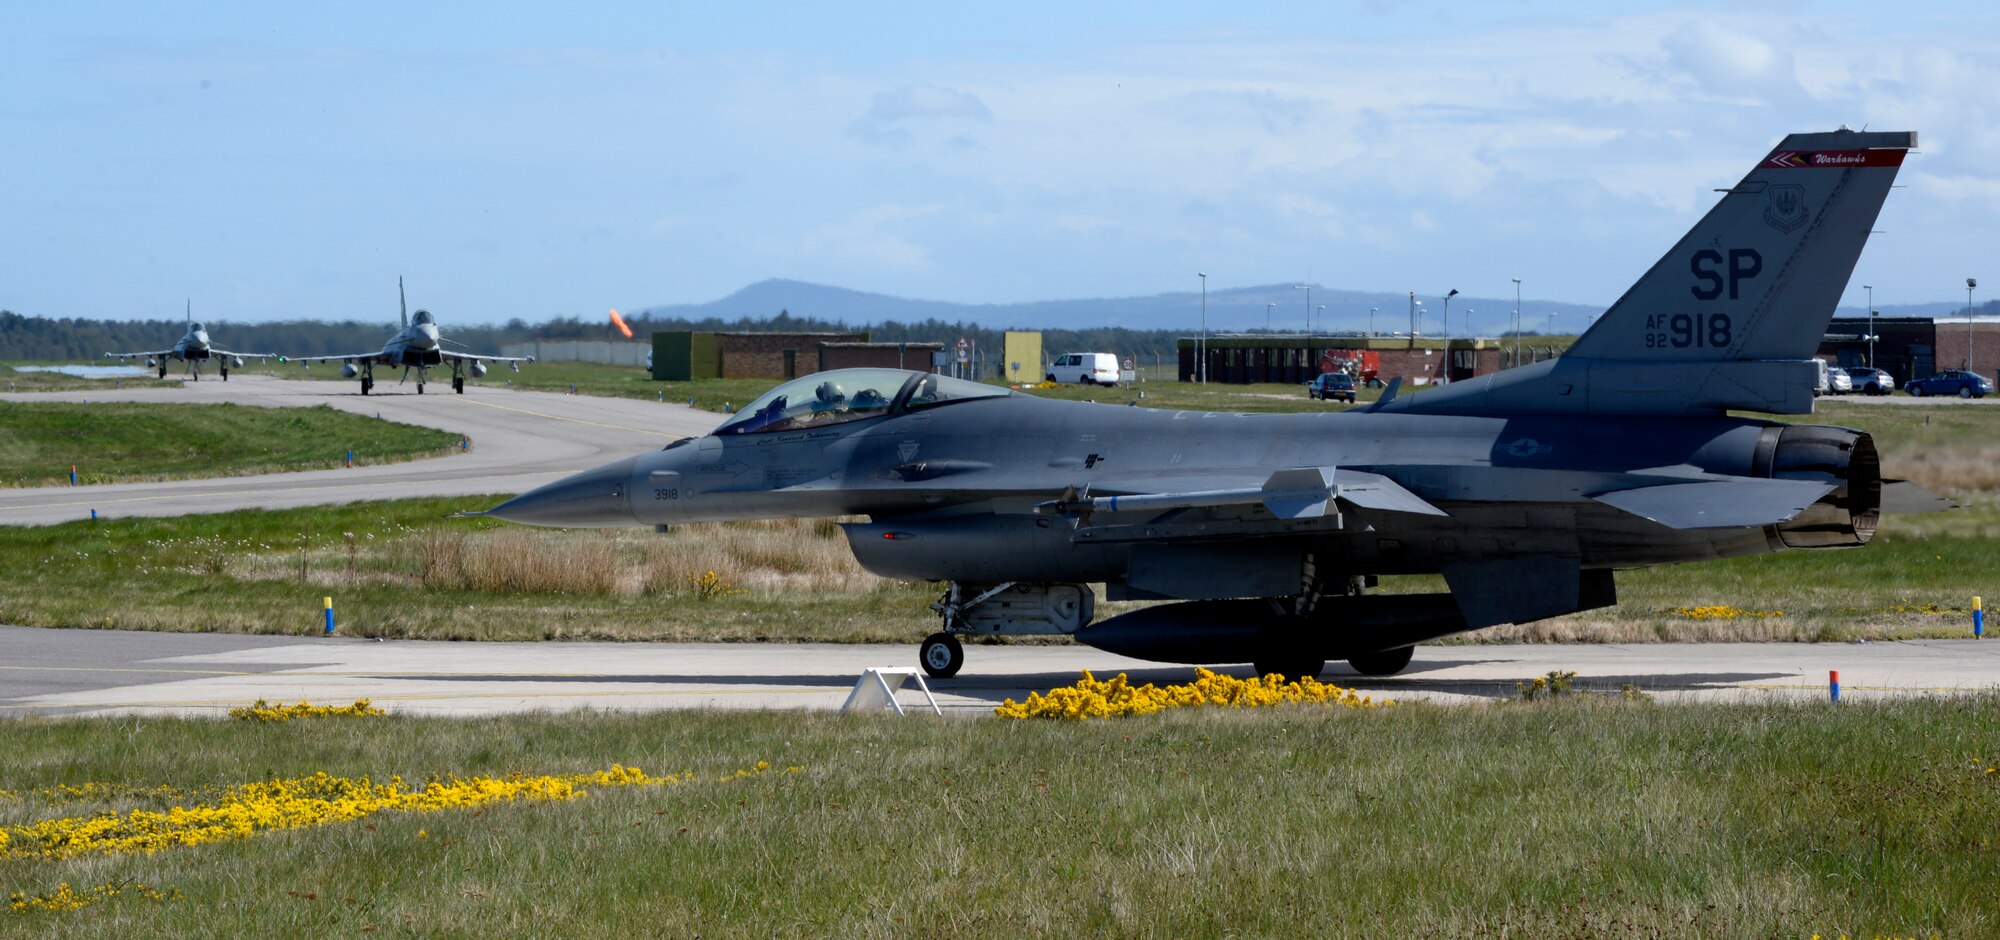 An F-16 Fighting Falcon from the 480th Fighter Squadron, 52nd Fighter Wing, Spangdahlem Air Base, Germany, waits for a pair of Royal Air Force Eurofighter Typhoons to taxi by before a low-level training sortie at RAF Lossiemouth, Scotland, May 7, 2019, during exercise Formidable Shield. Formidable Shield is a U.S.-led exercise, conducted by Naval Striking and Support Forces NATO. The purpose of the training is to improve allied interoperability in a live-fire integrated air and missile defense exercise. (U.S. Air Force photo by Master Sgt. Austin M. May)